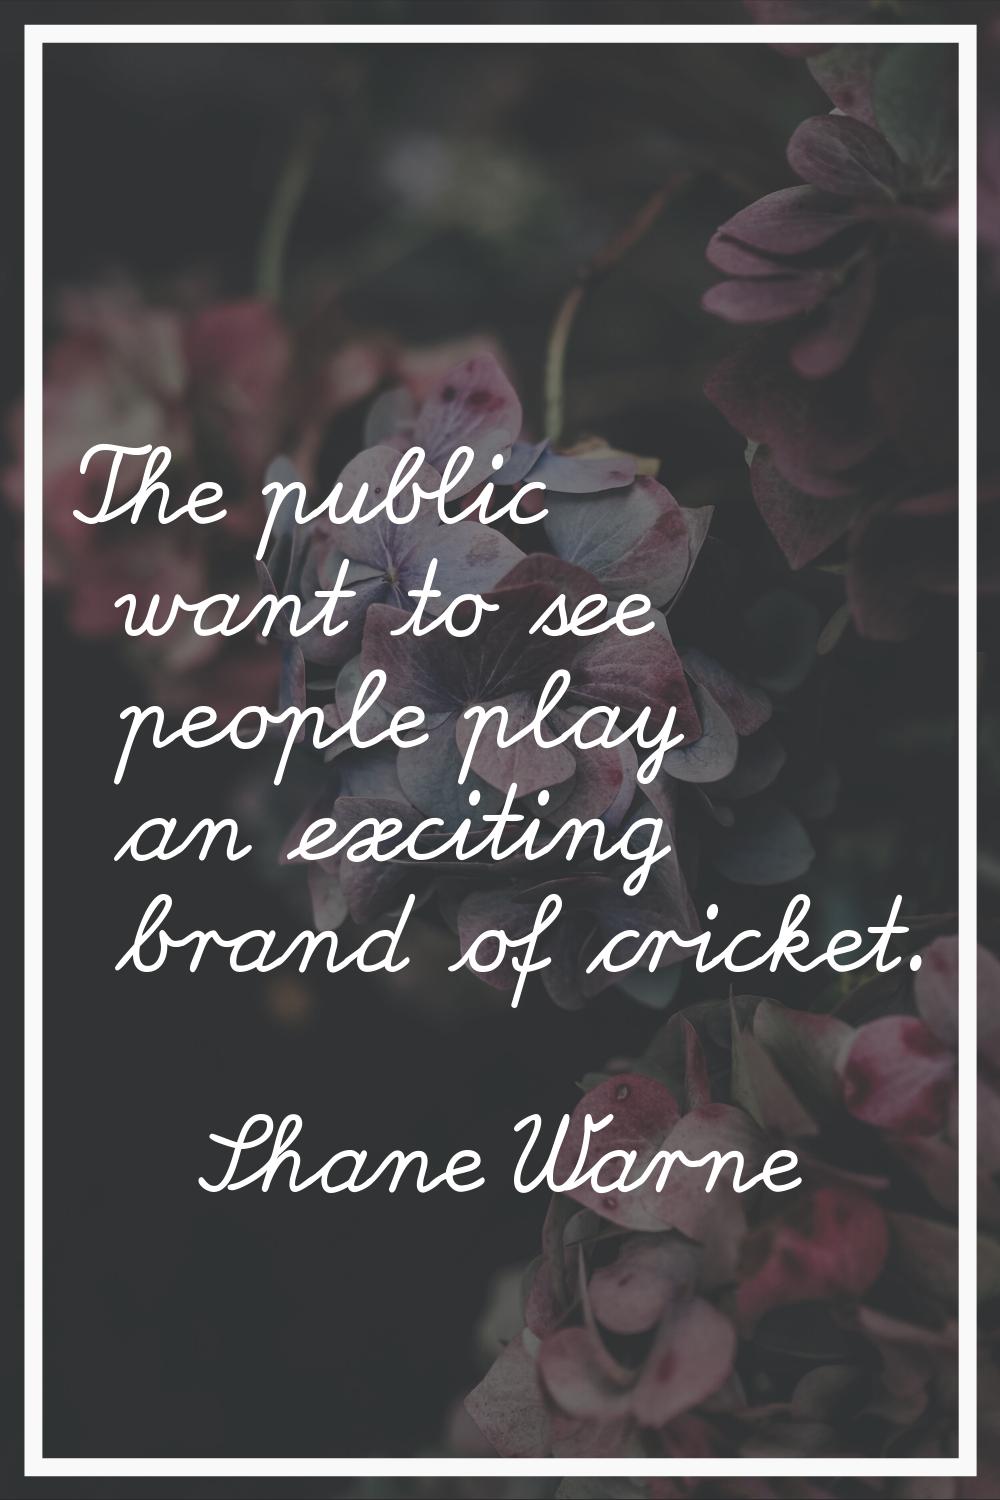 The public want to see people play an exciting brand of cricket.